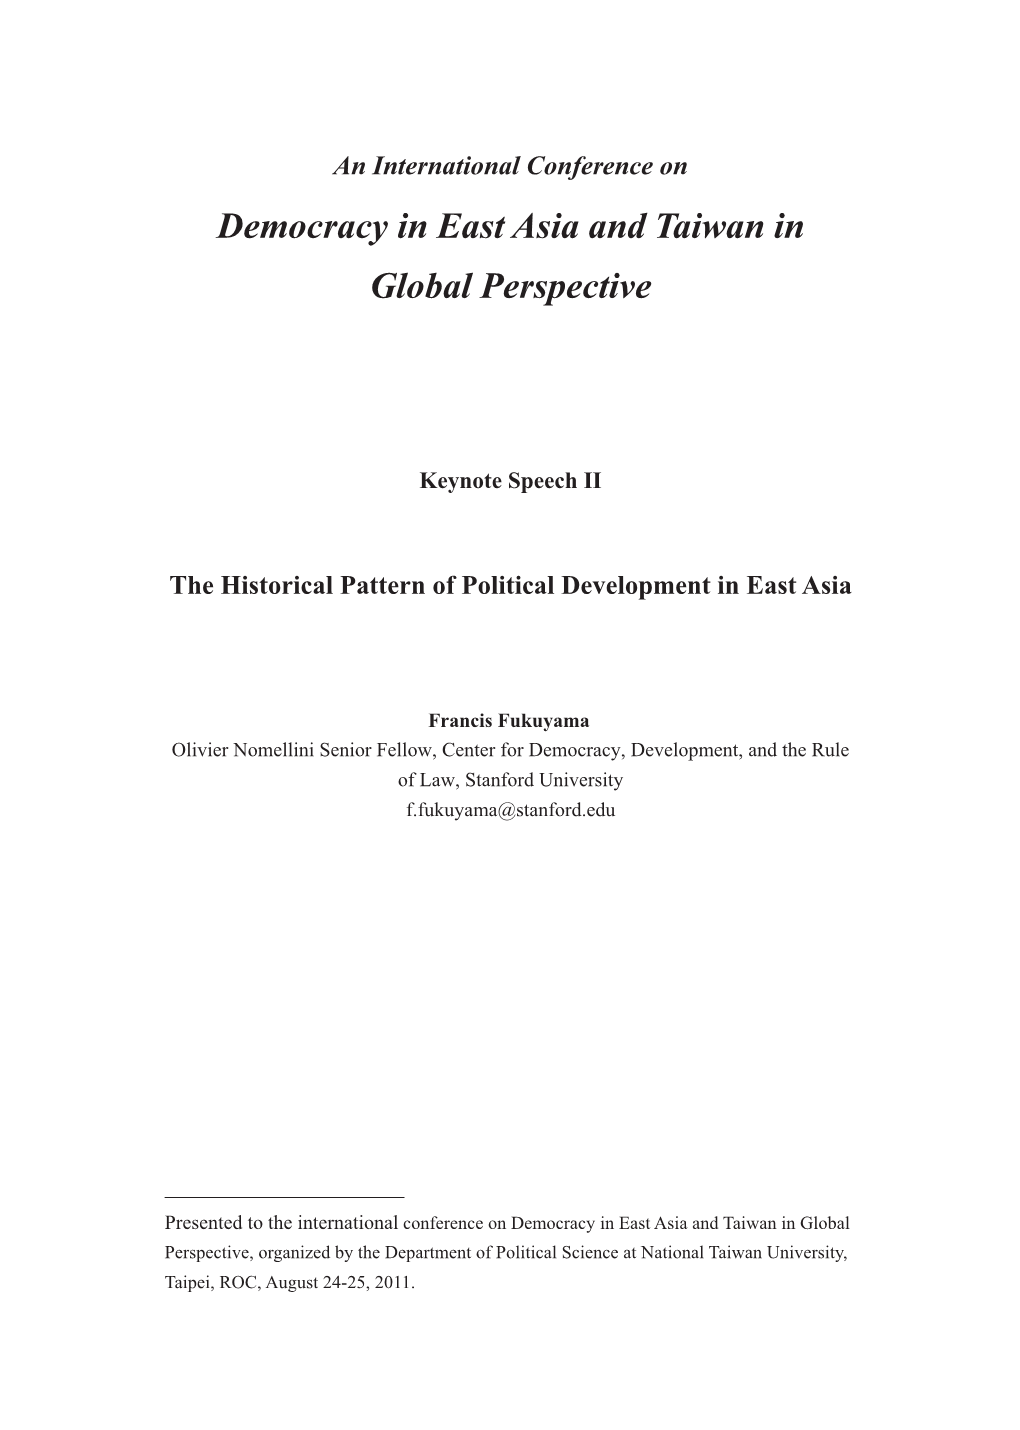 Democracy in East Asia and Taiwan in Global Perspective